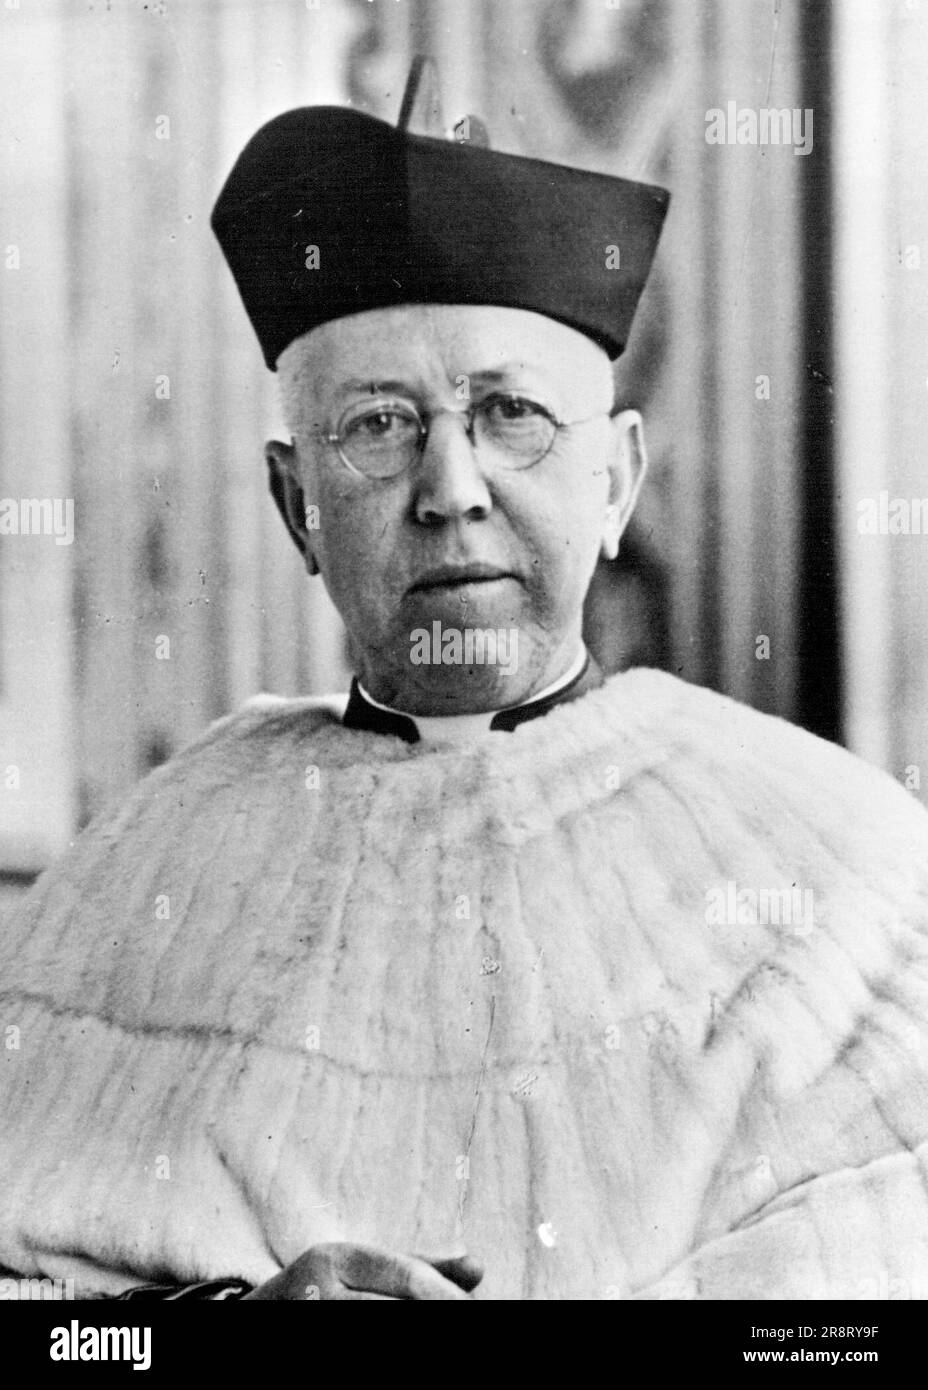 Cardinal Mooney - Archbishop of Detroit - Edward Mooney, created Cardinal in 1946; he was born in Mount Savage, U.S.A., in 1882. February 24, 1954. (Photo by Camera Press). Stock Photo